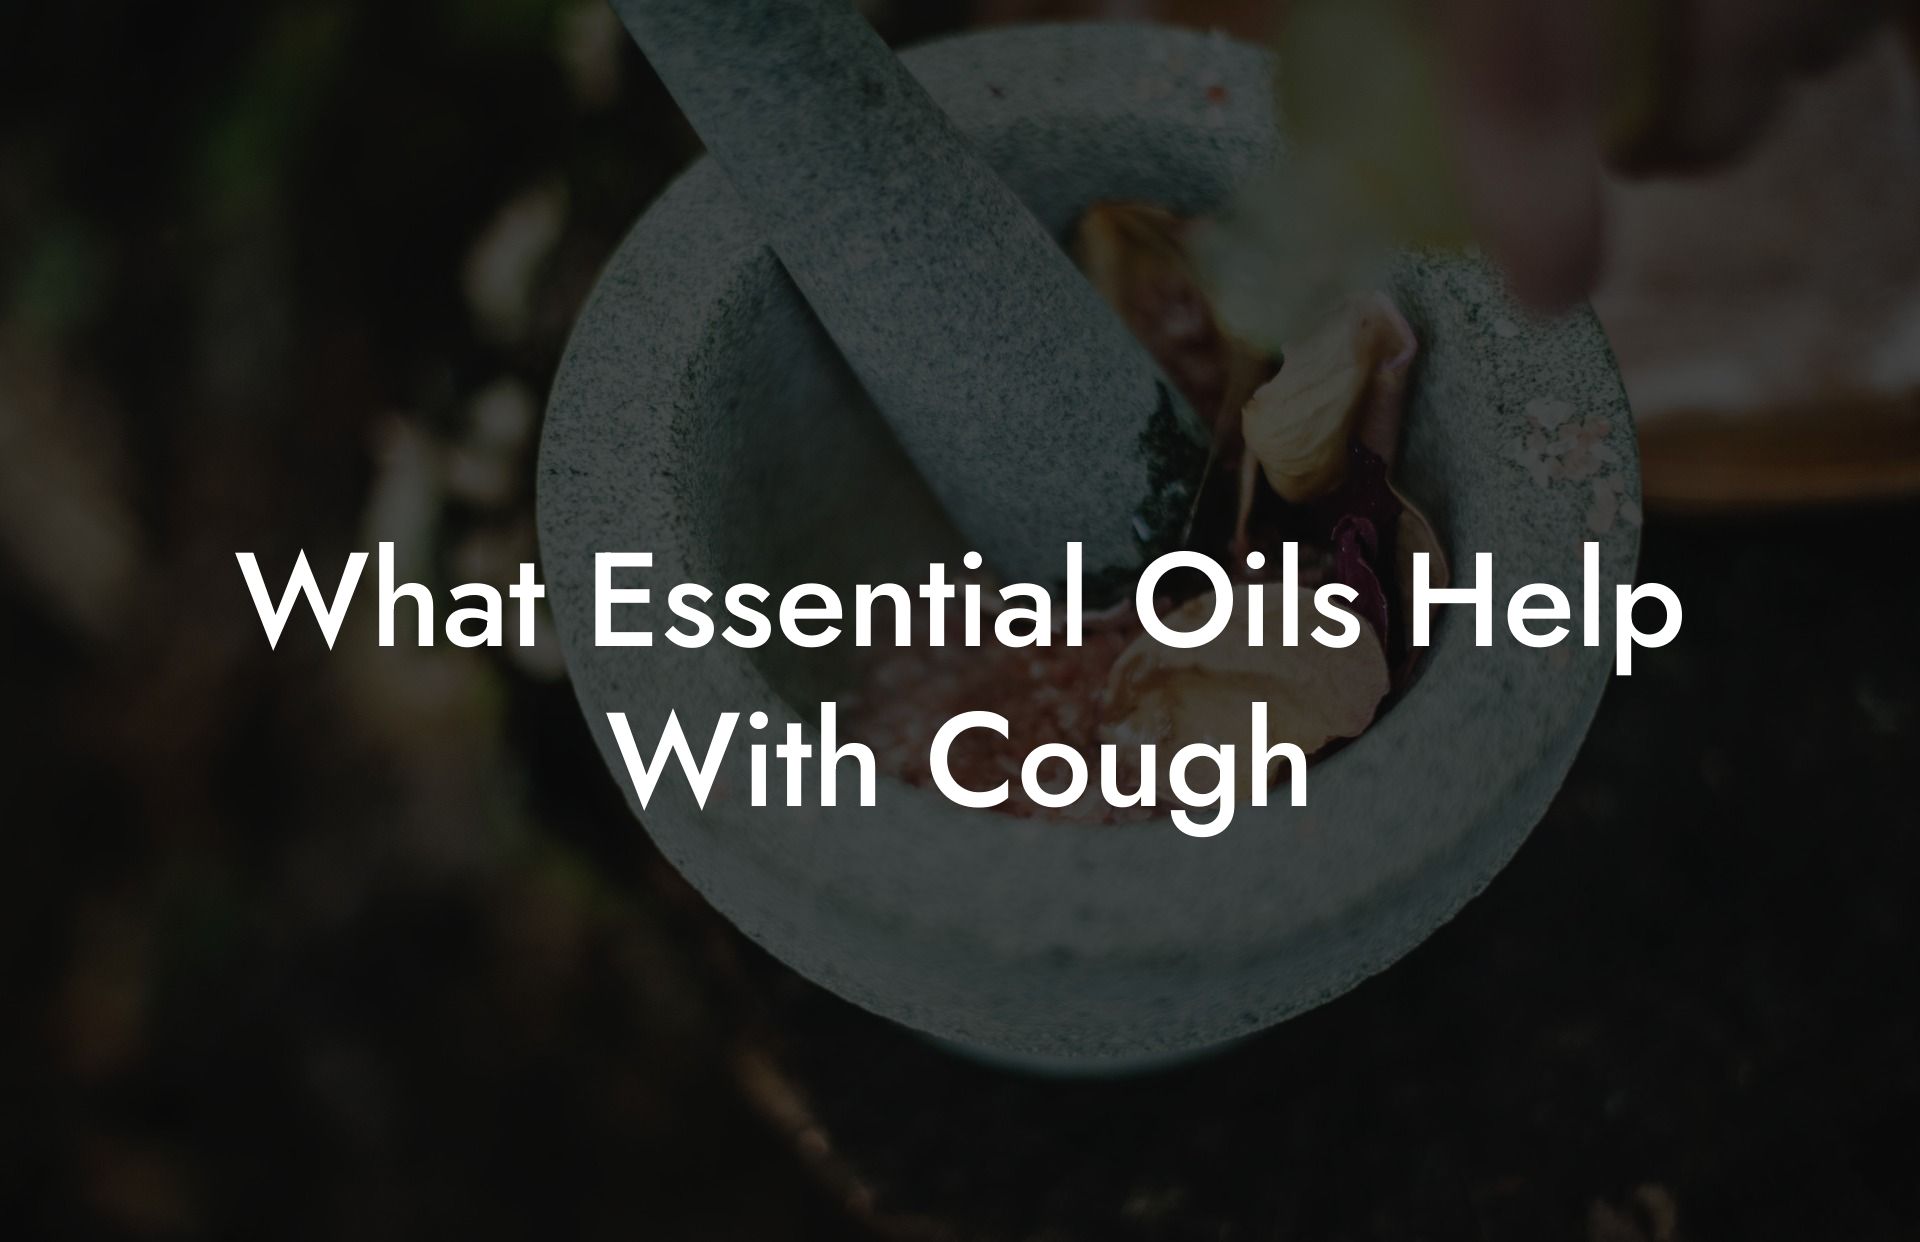 What Essential Oils Help With Cough